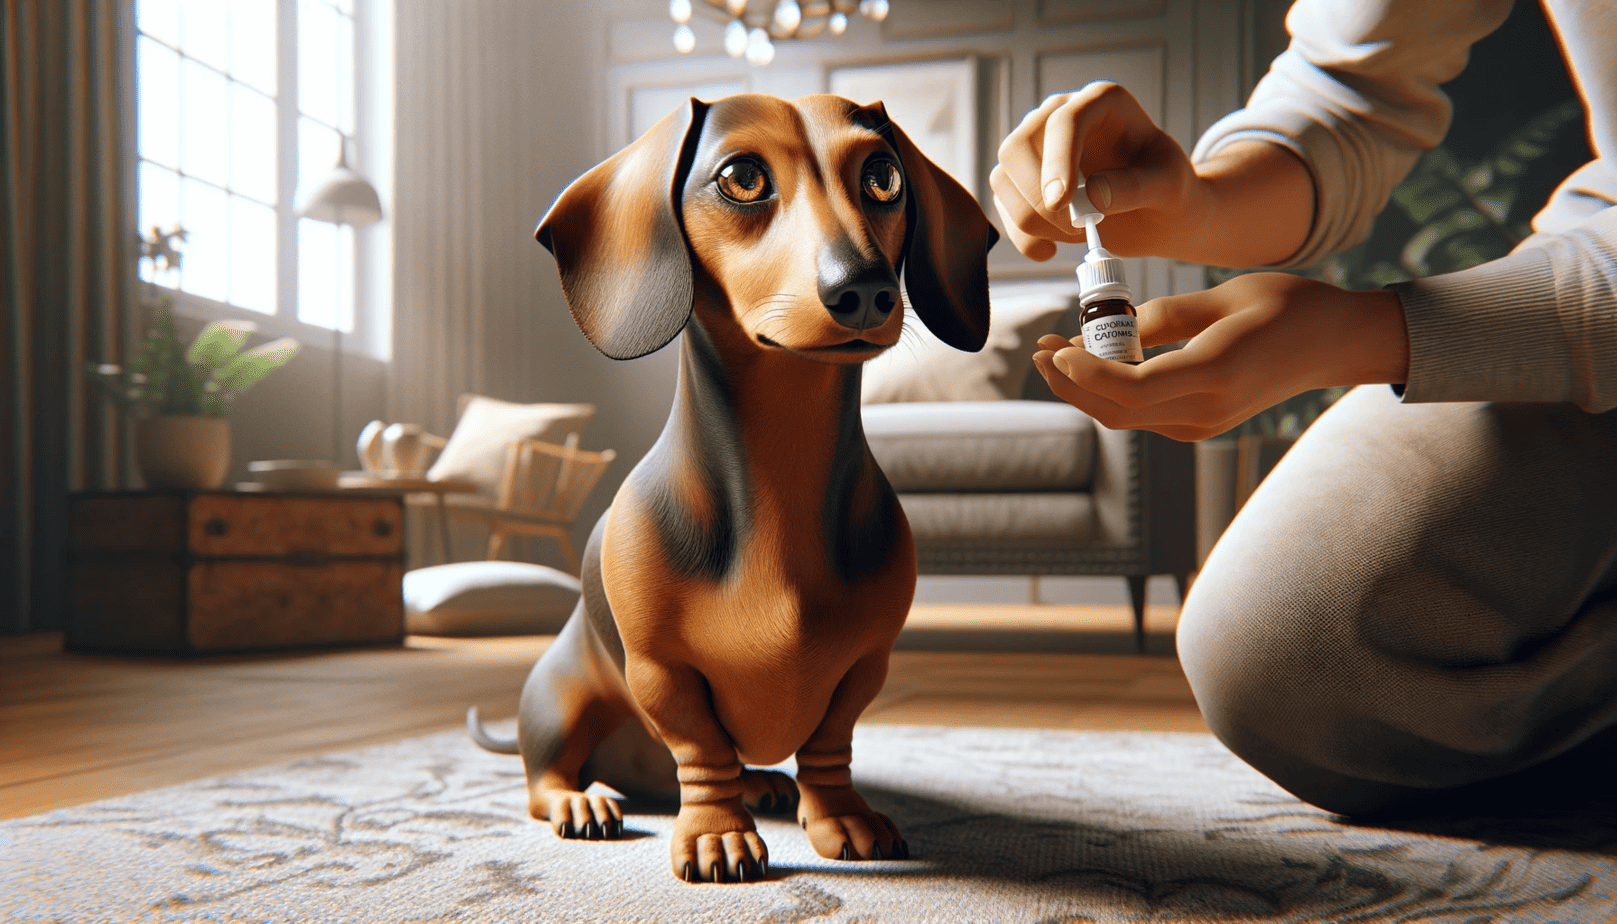 Can You Use Visine On Dogs? Is It Safe?